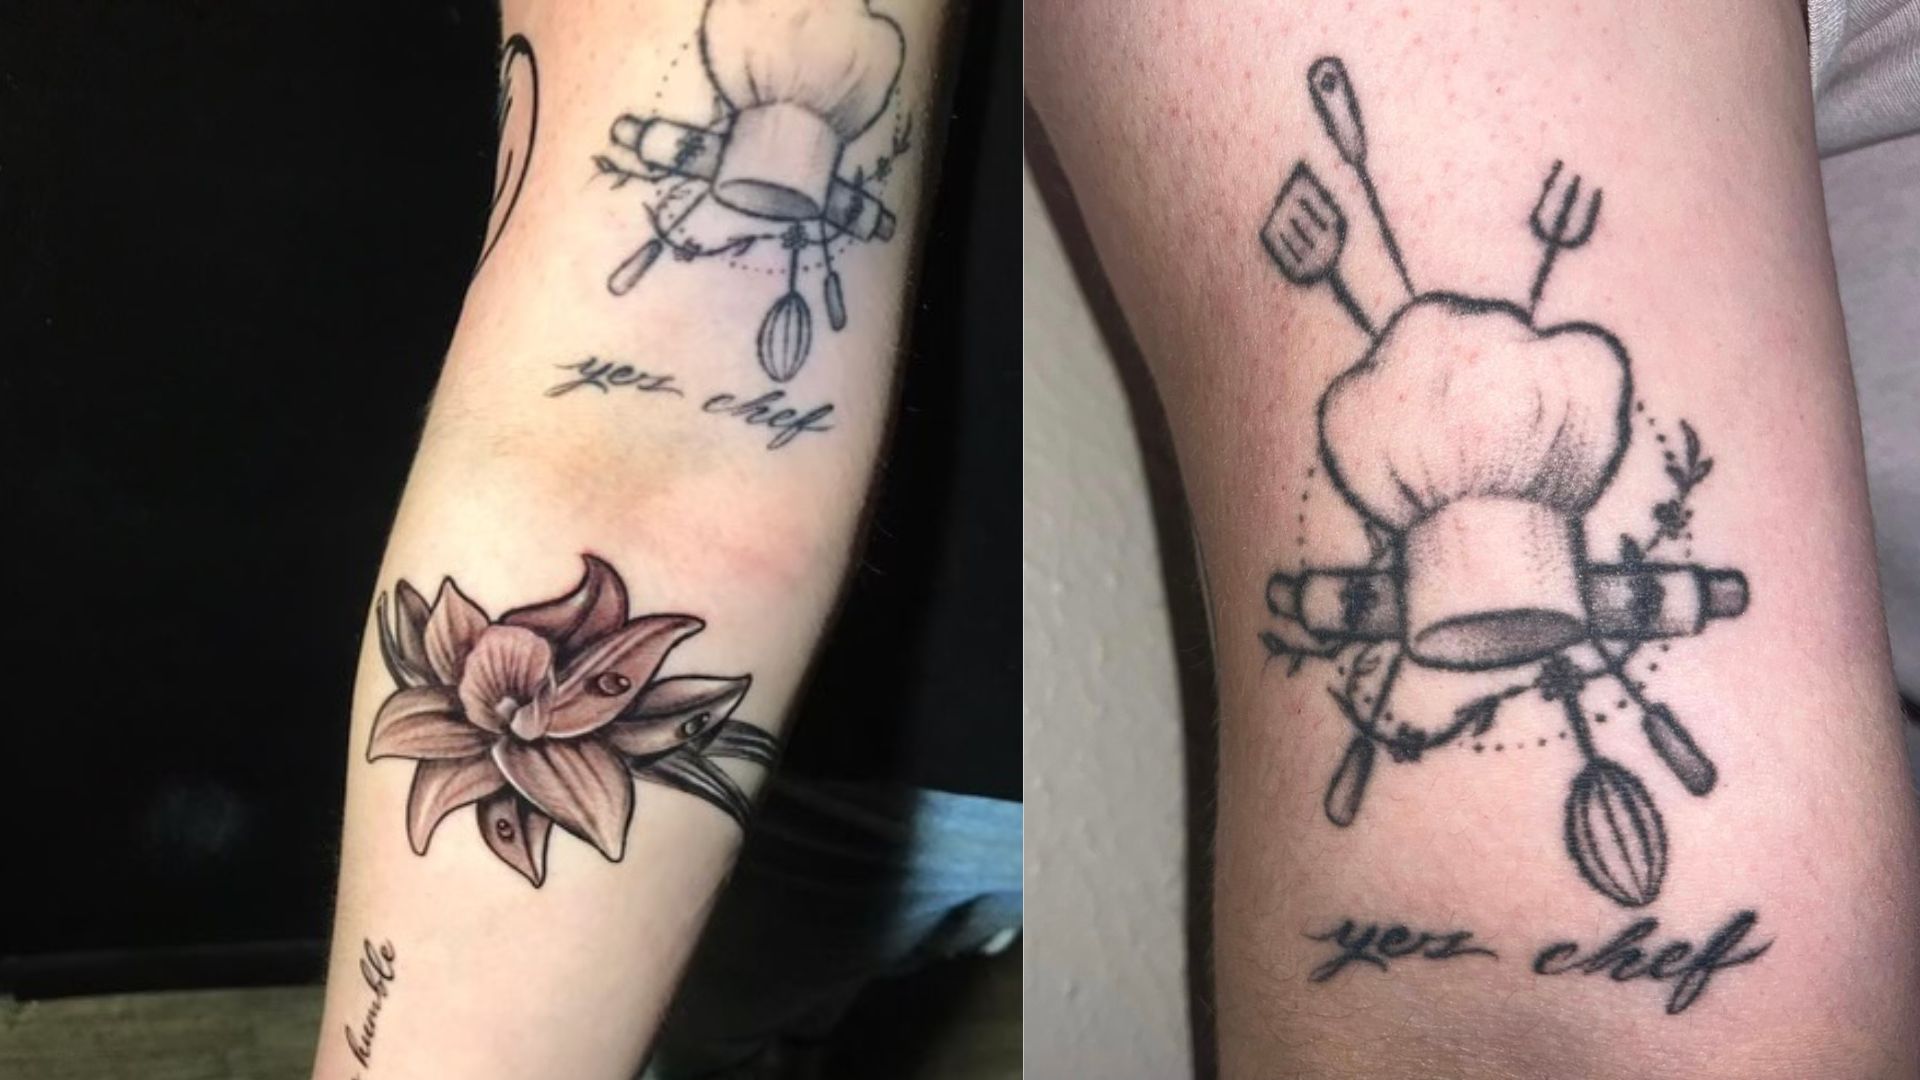 Knife Tattoo Designs at Ace Tattooz - Unique and Edgy Art